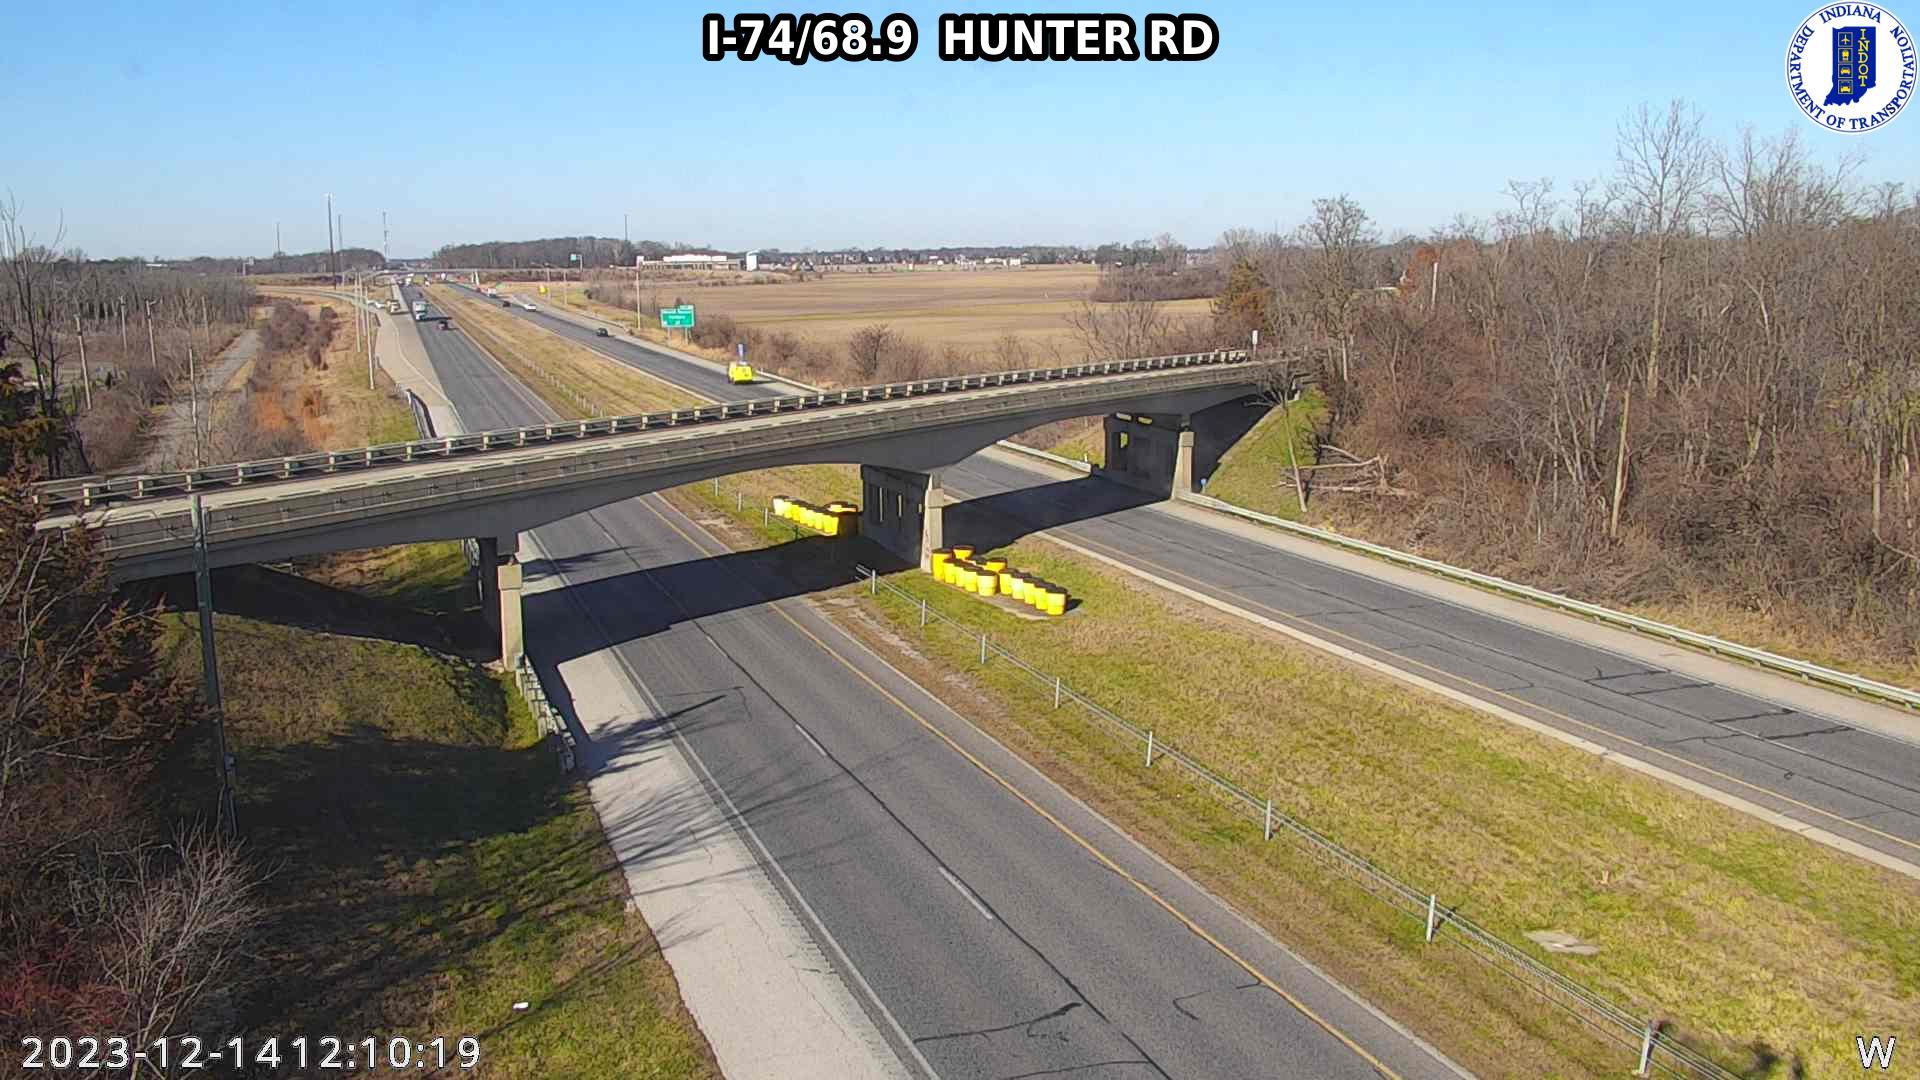 Clermont Heights: I-74: I-74/68.9 HUNTER RD Traffic Camera